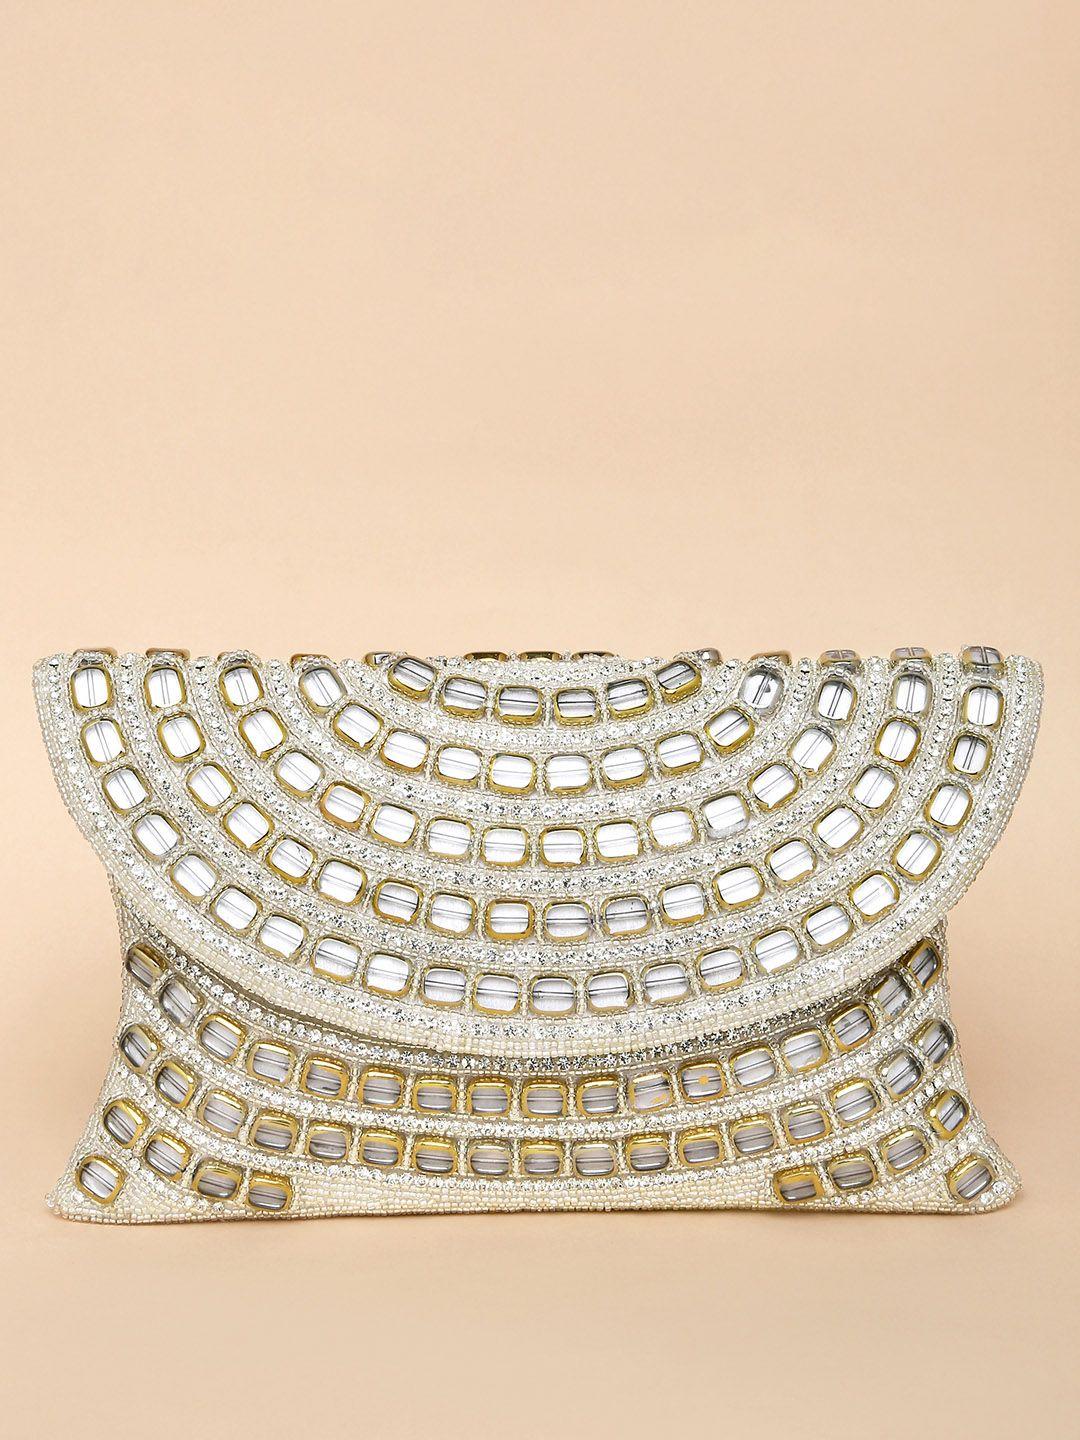 peora silver-toned & gold-toned embellished purse clutch